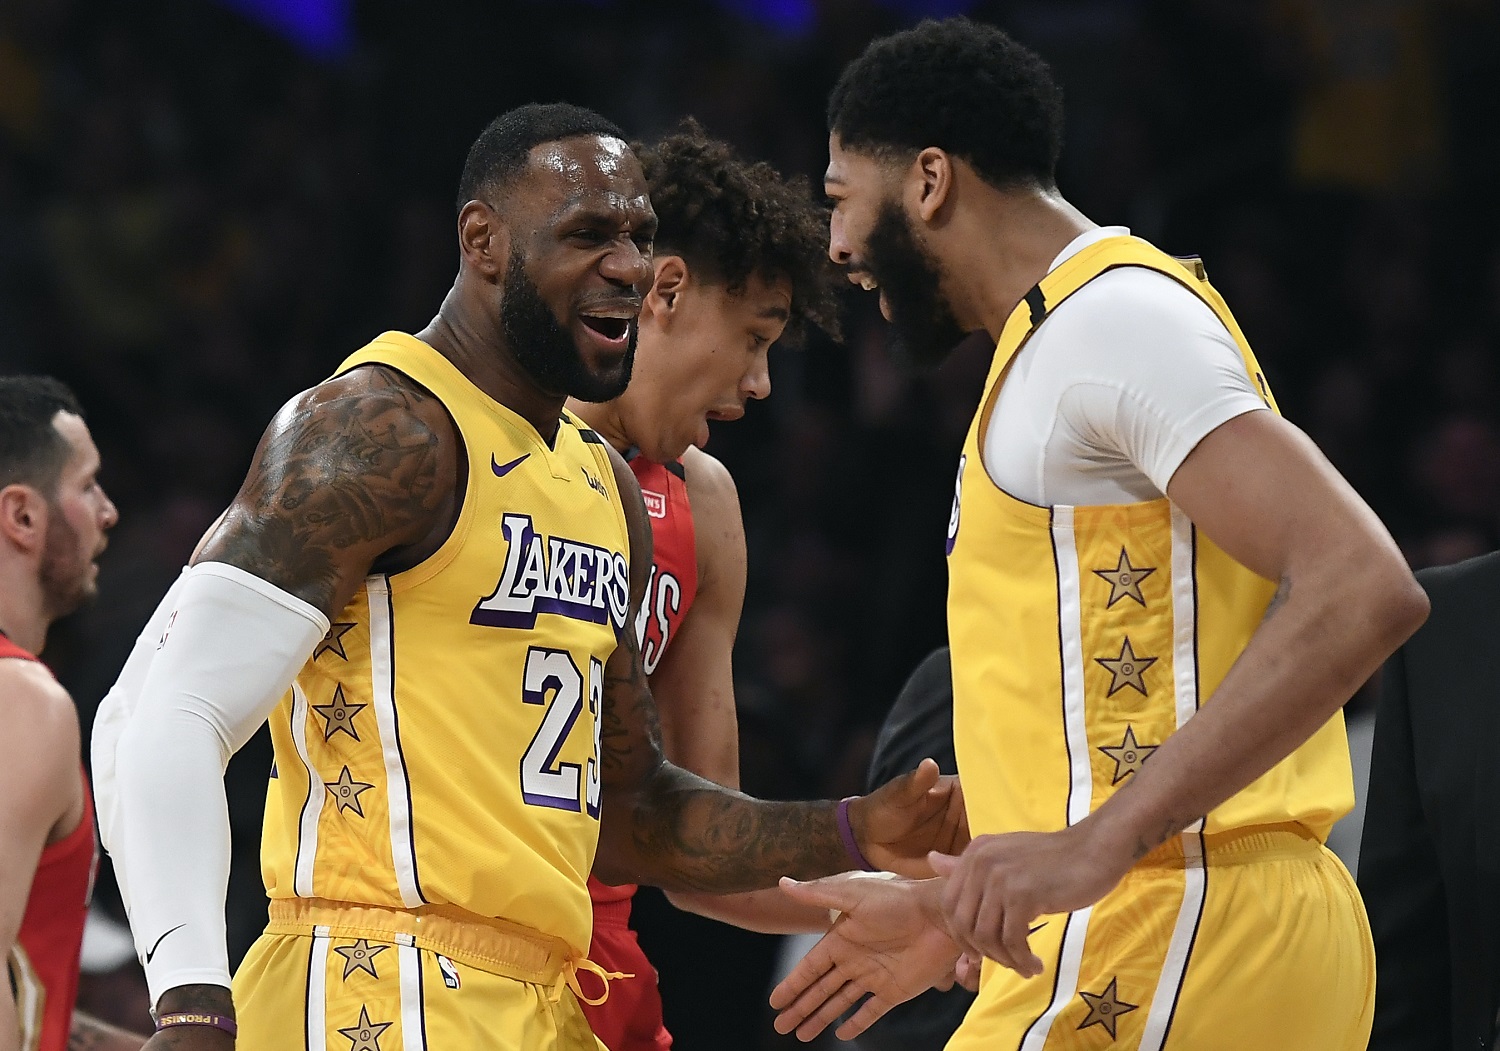 LeBron James reacts after Anthony Davis of the Los Angeles Lakers dunked against the New Orleans Pelicans at Staples Center on Jan. 3, 2020. | Kevork Djansezian/Getty Images